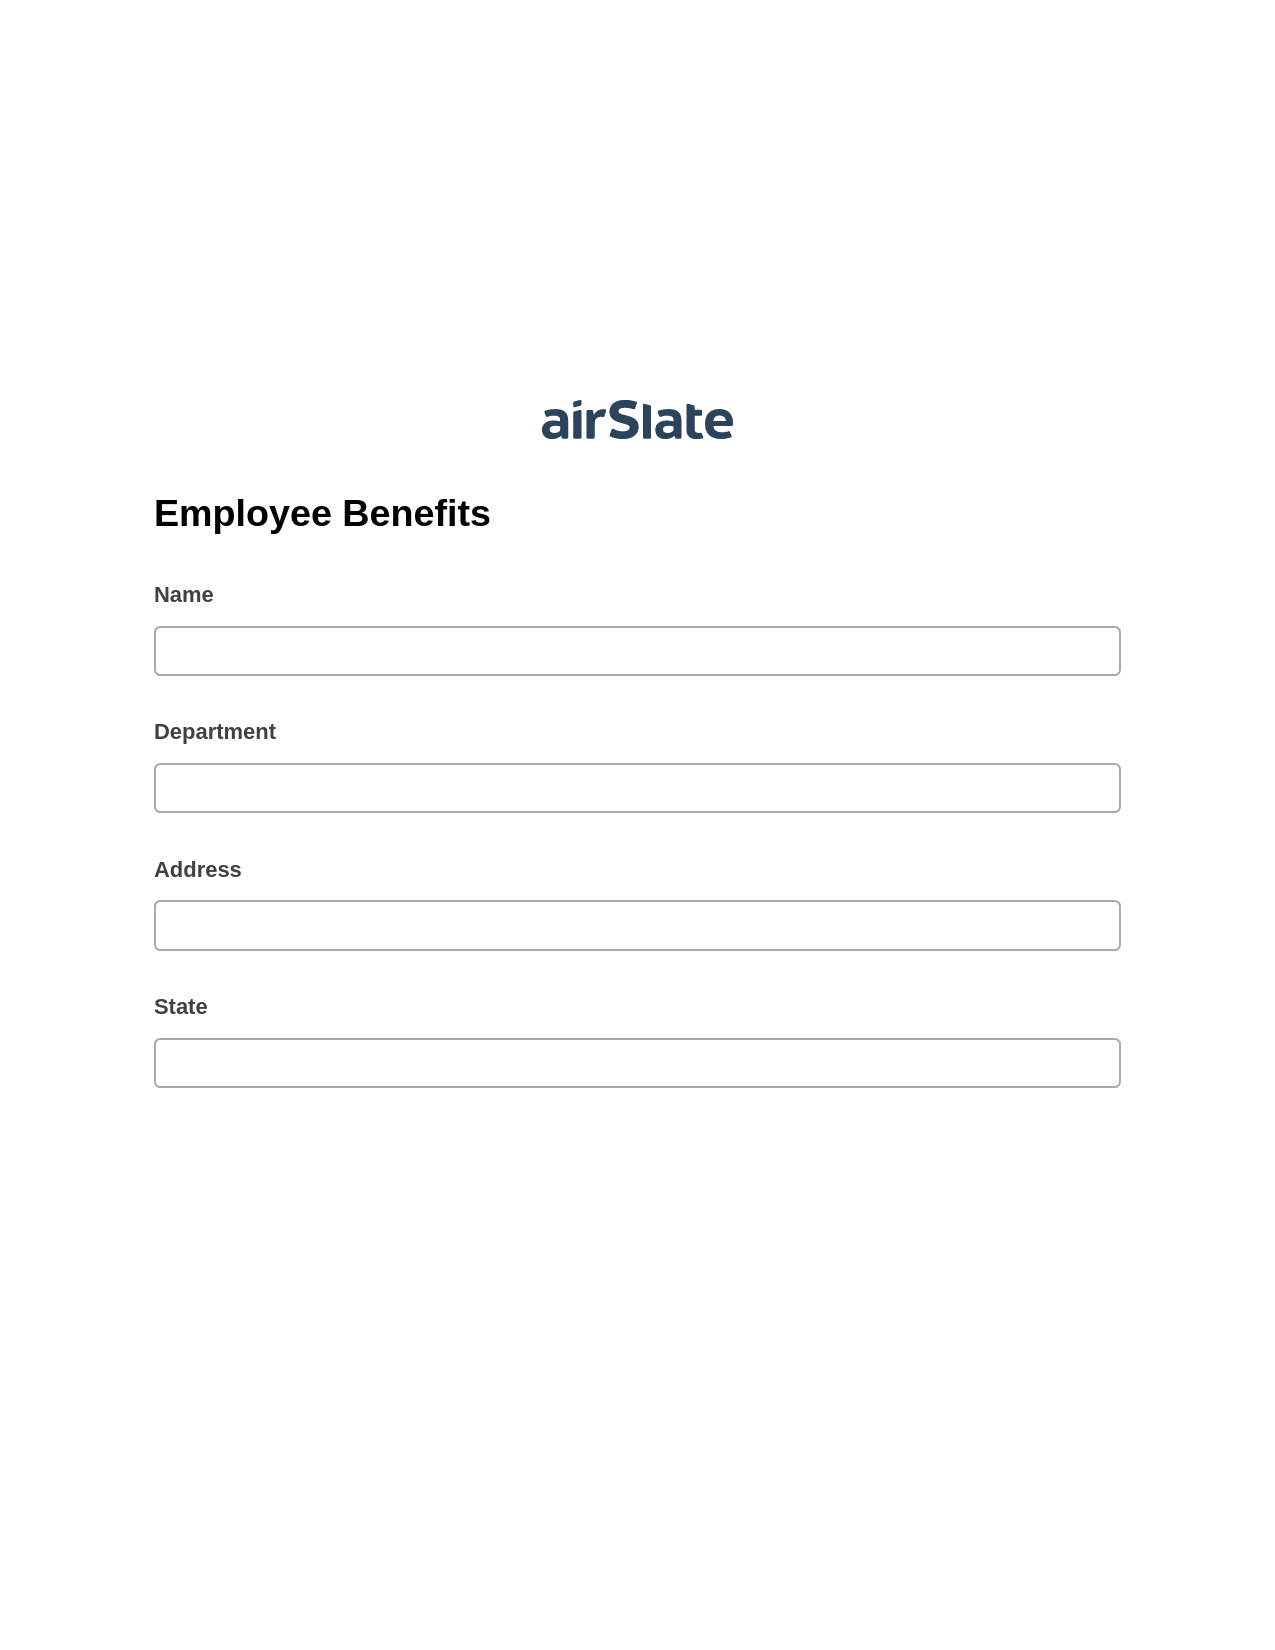 Employee Benefits Pre-fill from Office 365 Excel Bot, Invoke Salesforce Process Bot, Export to NetSuite Record Bot